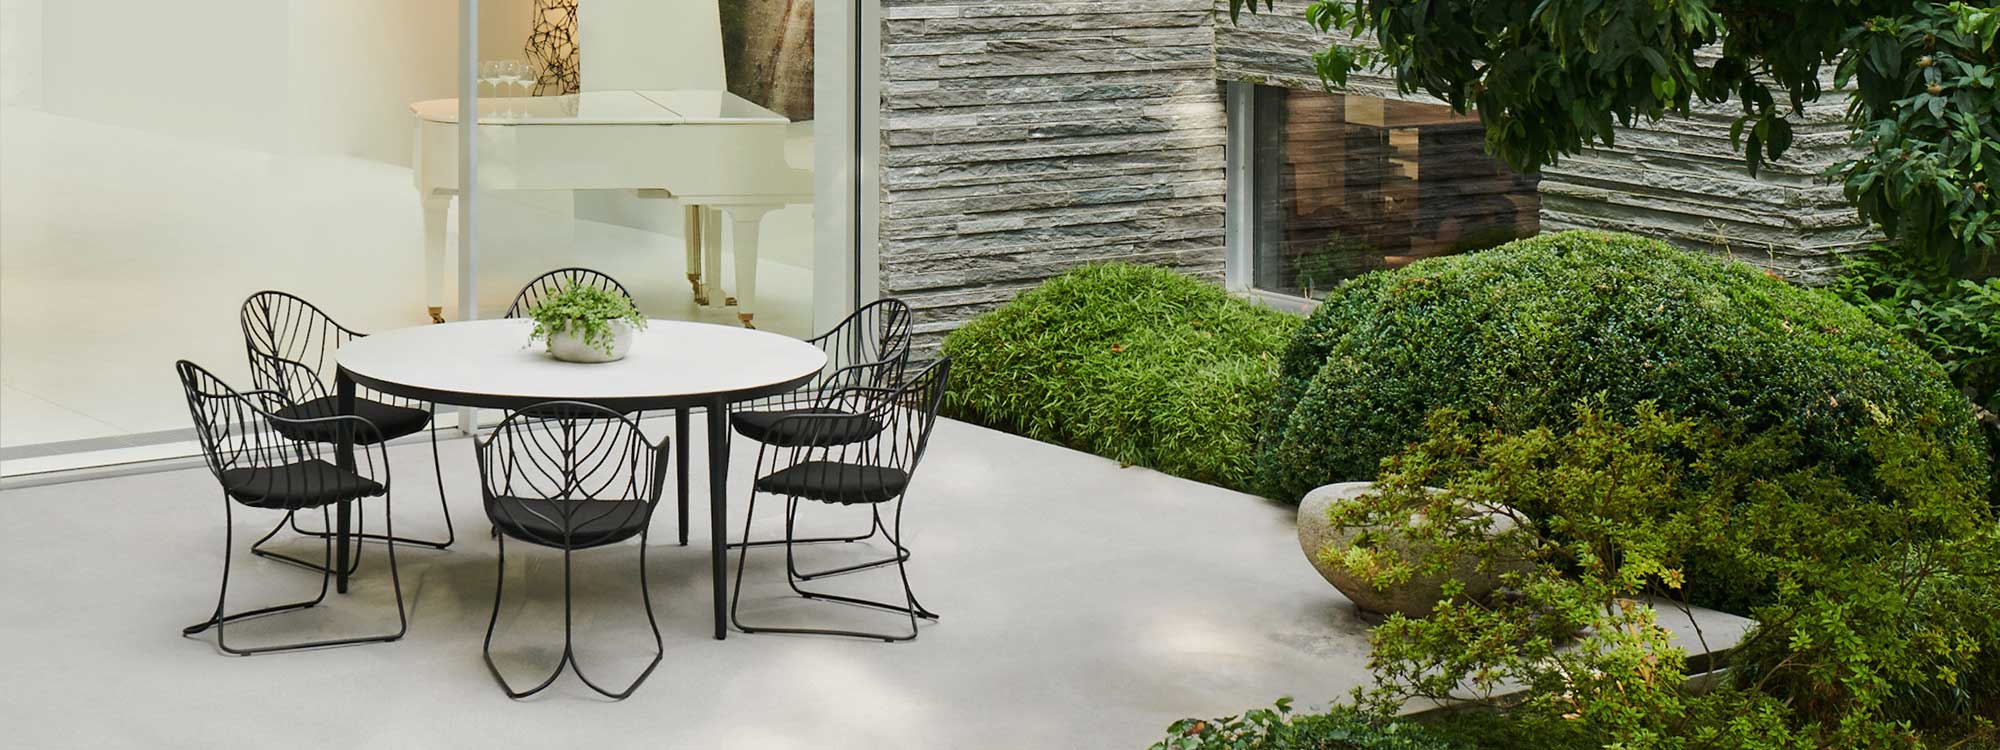 Image of Folia chairs around a circular U-nite garden table by Royal Botania, with white grand piano in the background